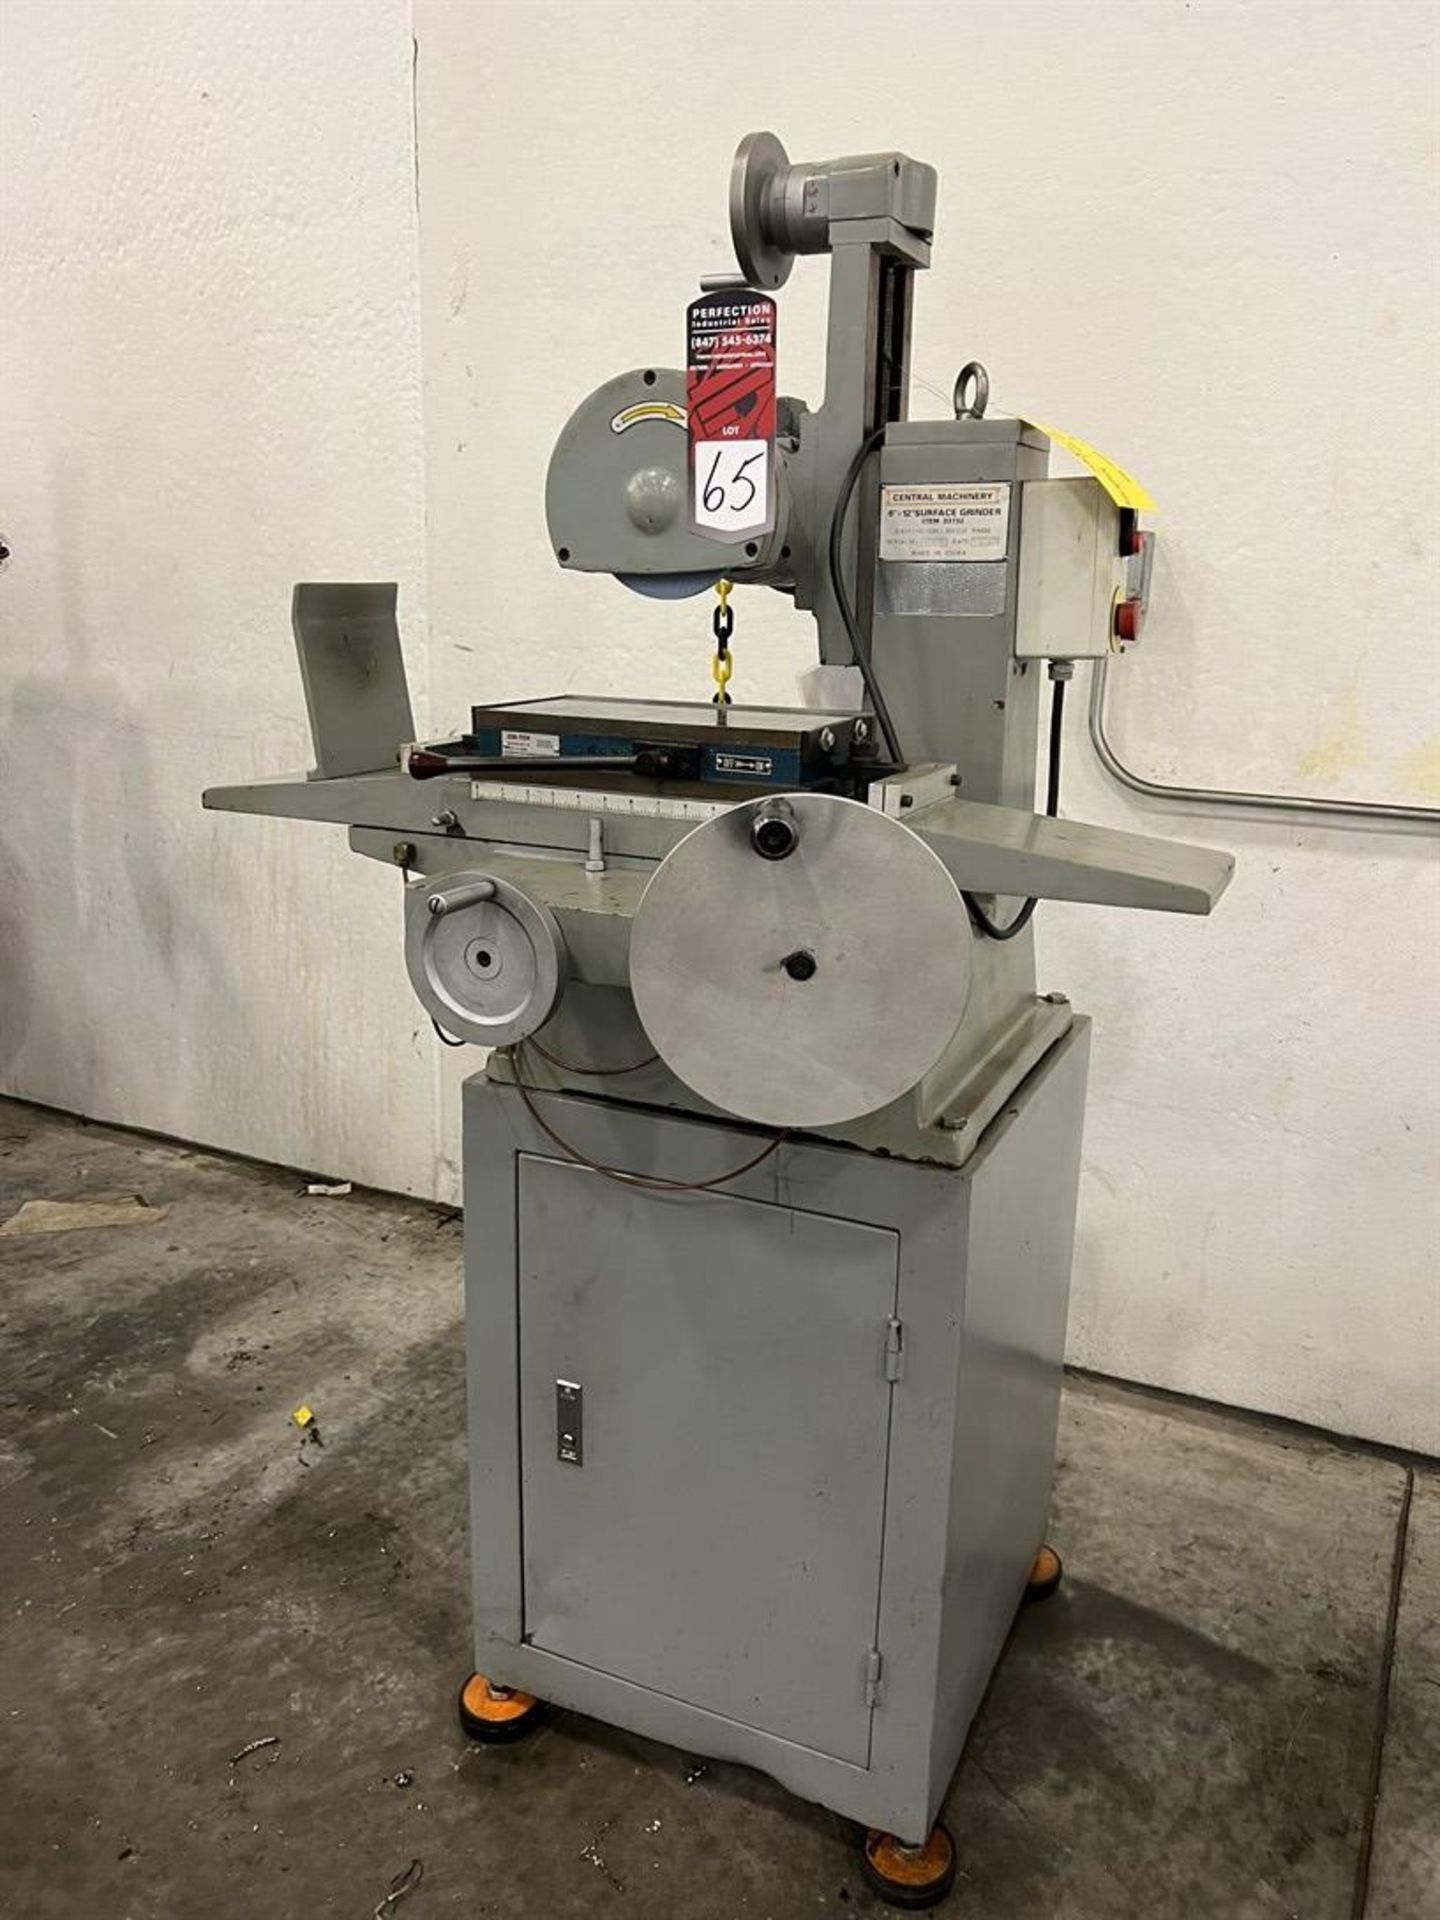 CENTRAL MACHINERY 33732 6” x 12” Surface Grinder, s/n 08615, w/ Cen-Tech Magnetic Chuck